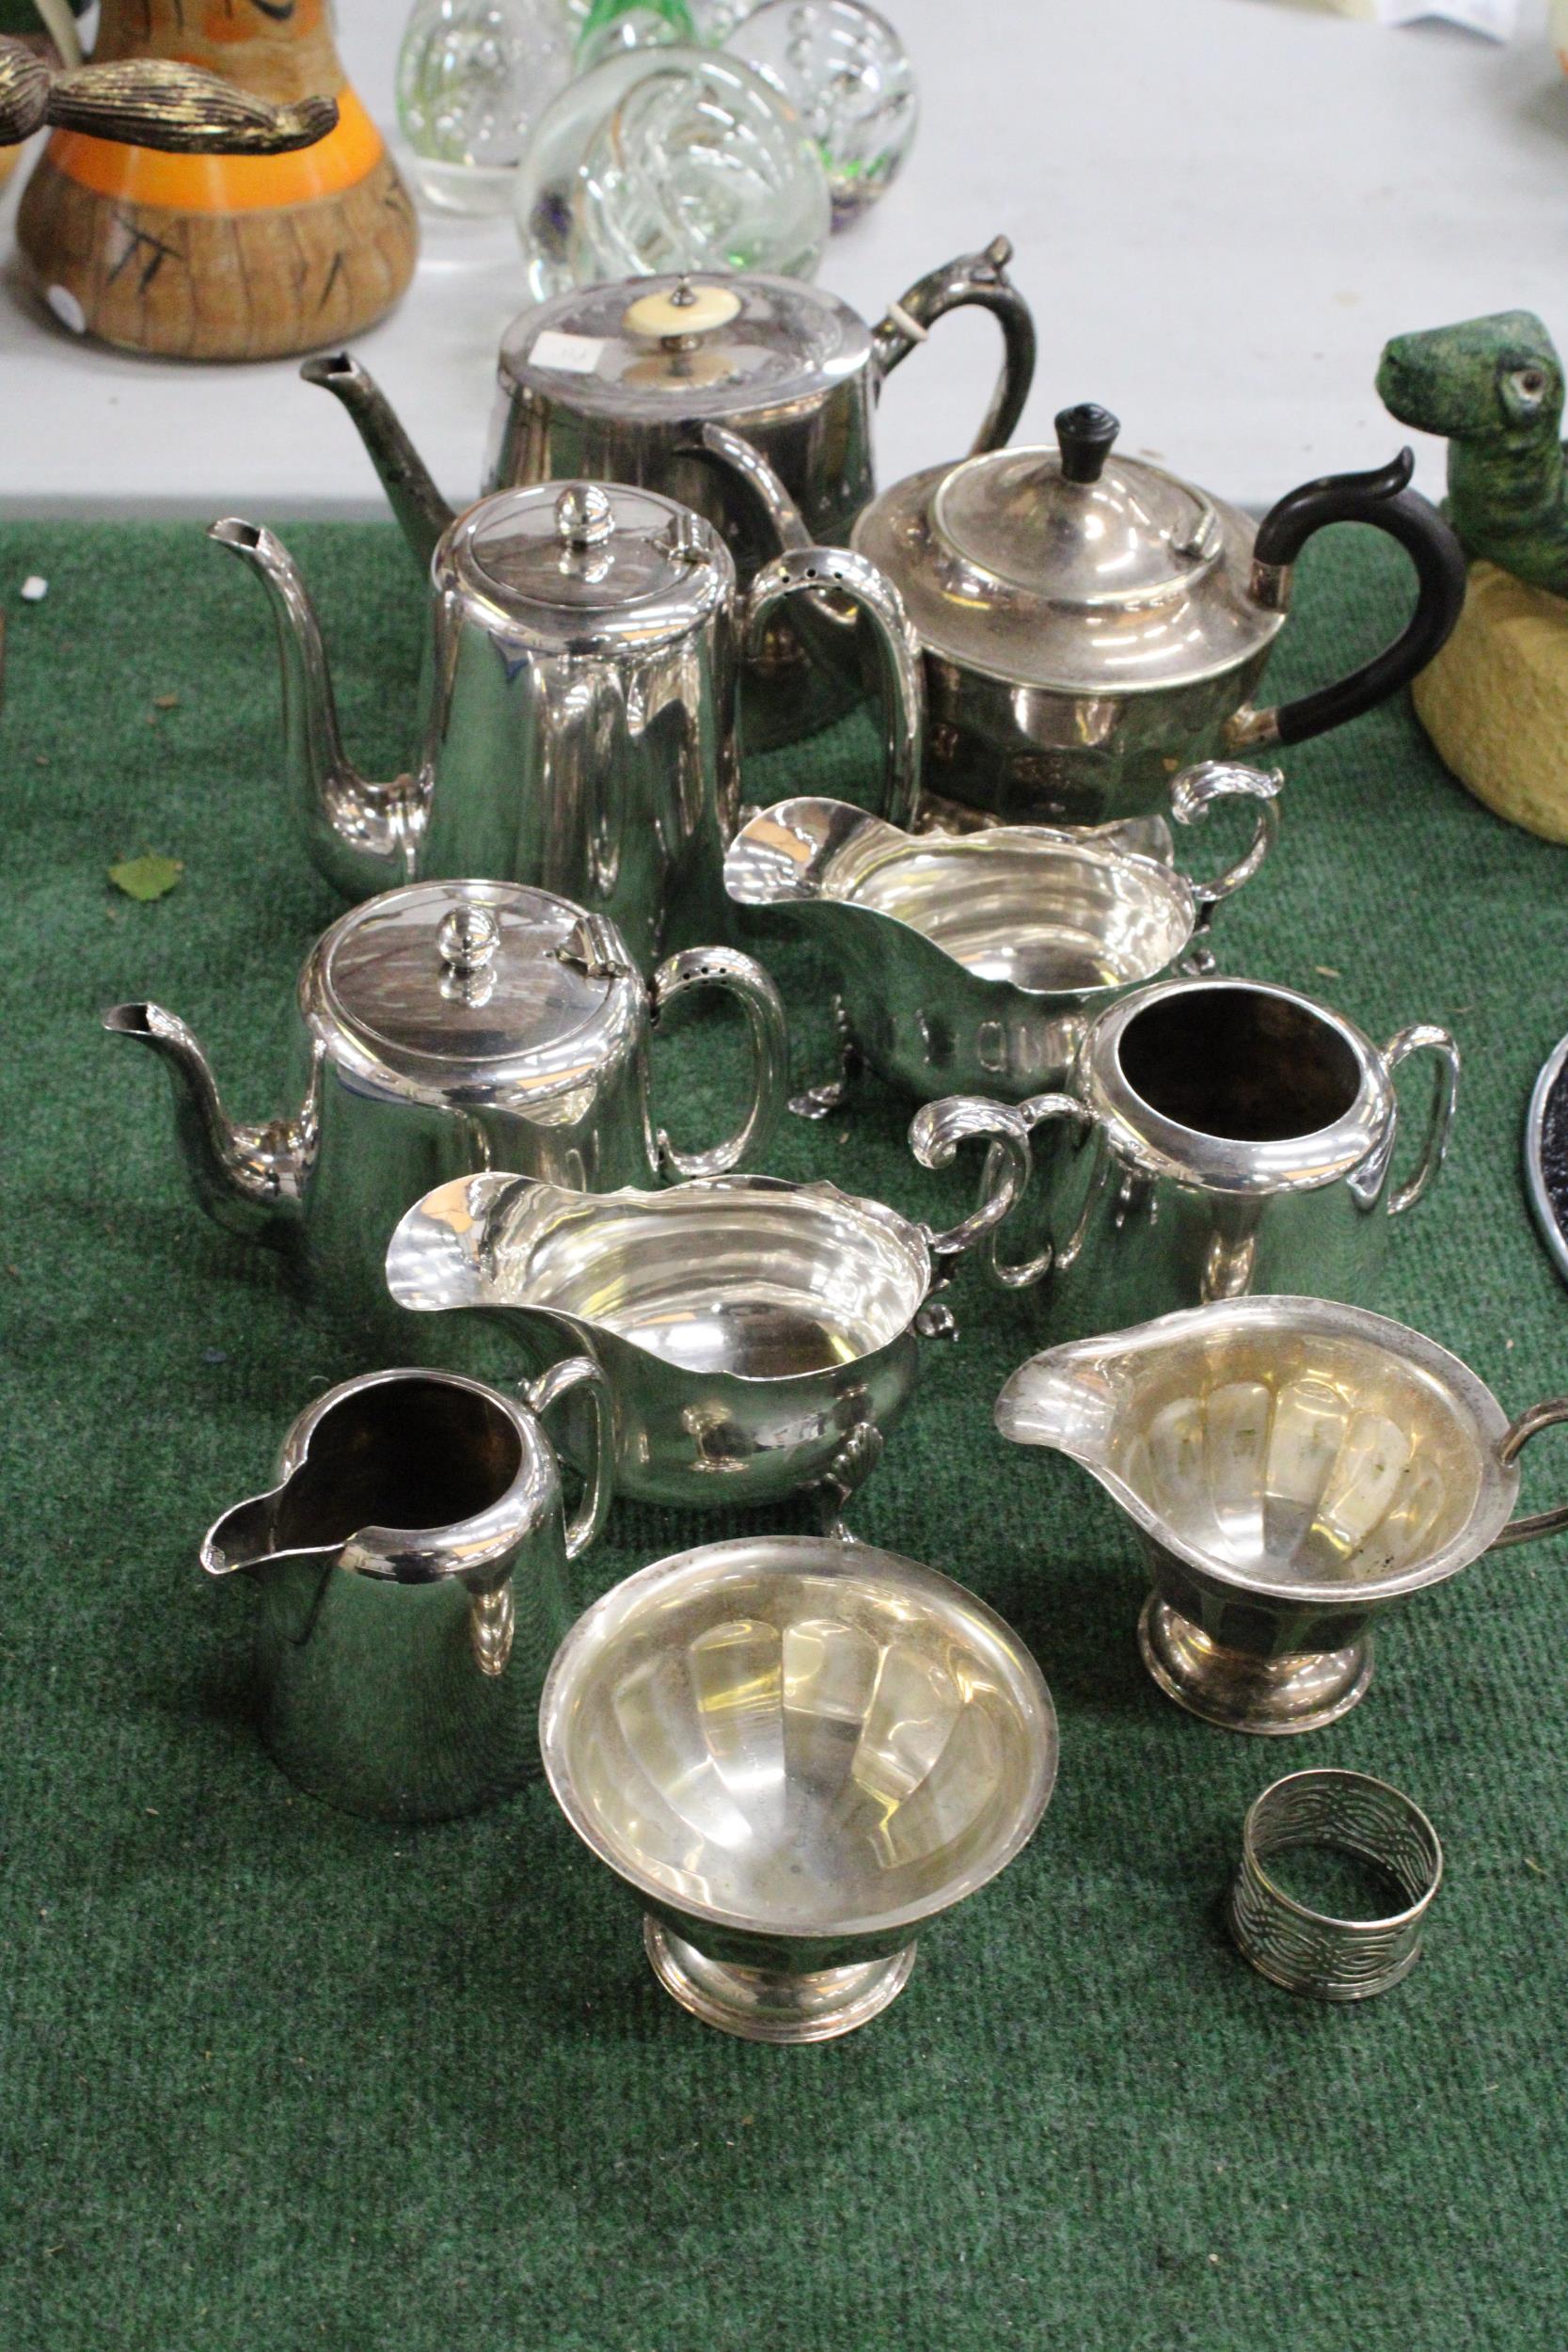 A QUANTITY OF SILVER PLATED ITEMS TO INCLUDE TEAPOTS, COFFEE POT, JUGS, SUGAR BOWLS AND A NAPKIN